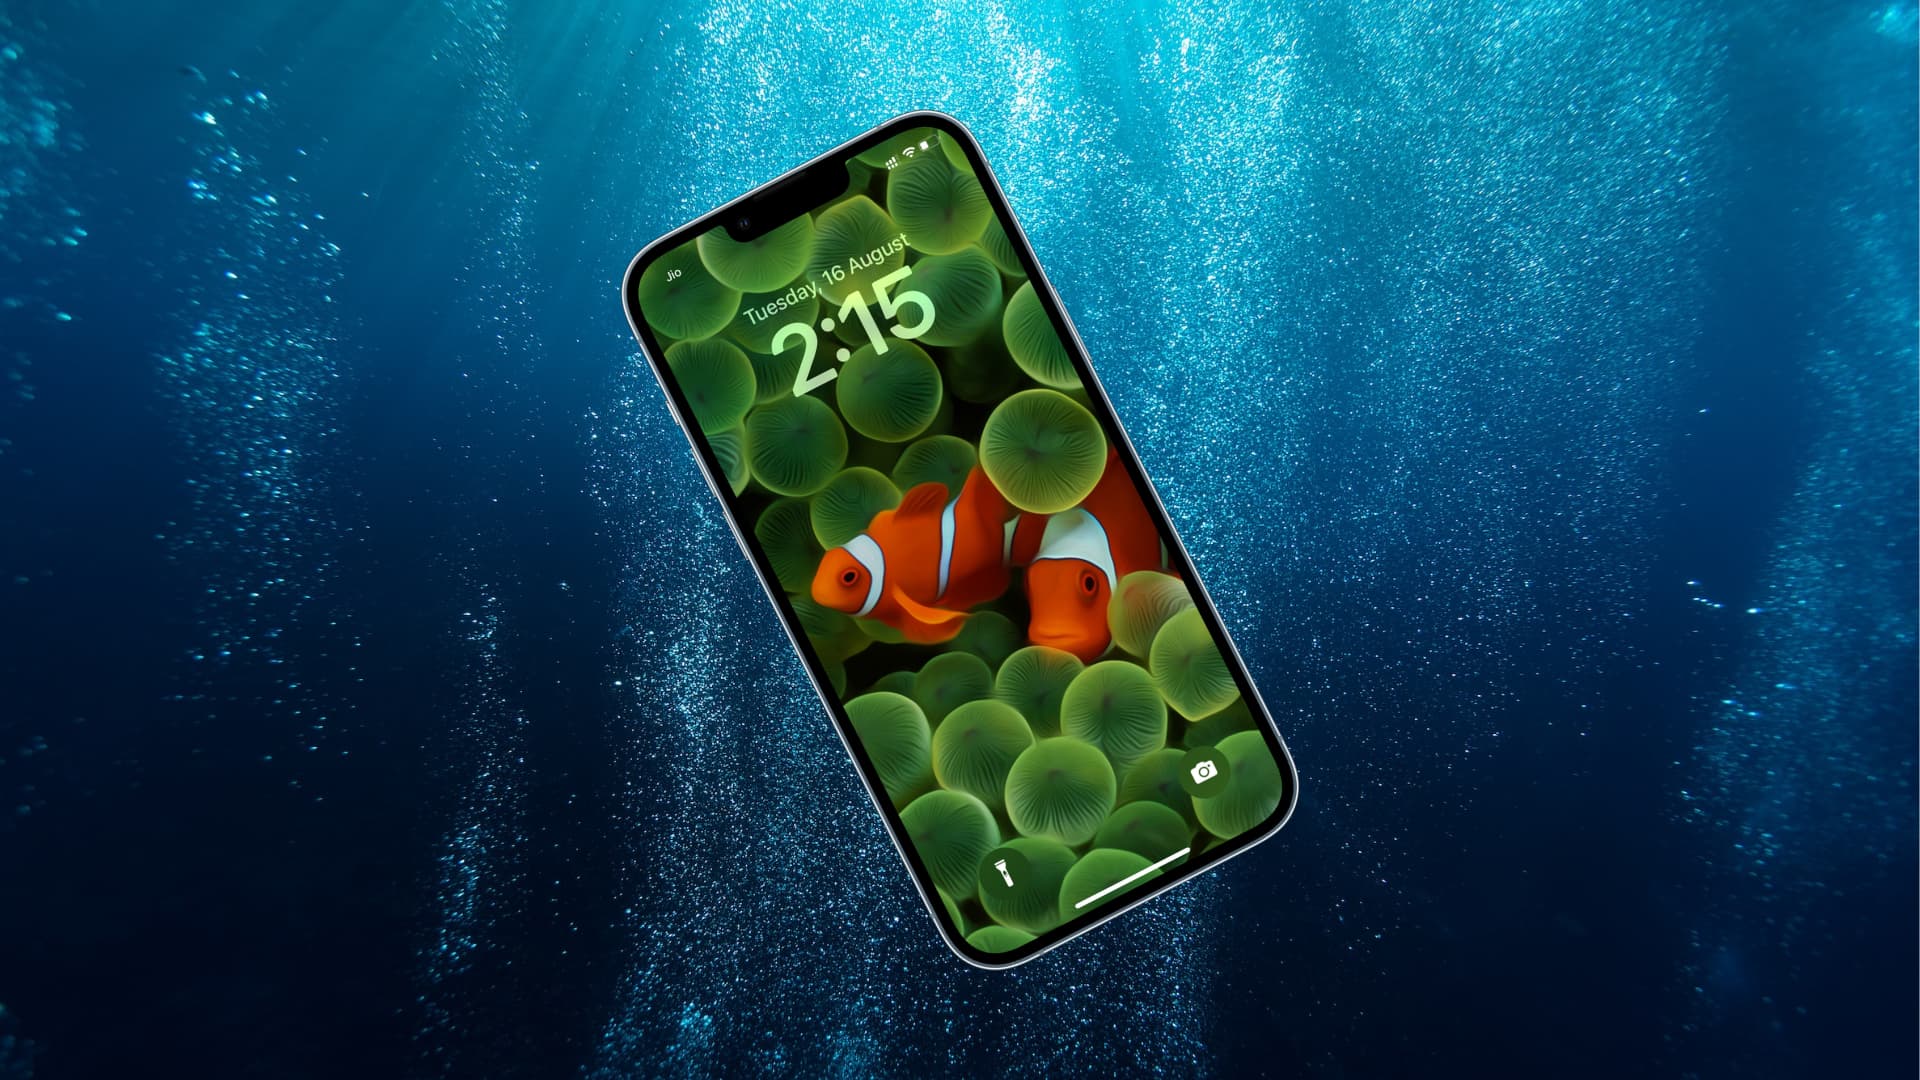 Water Submersion Tips: Actions To Take If You Drop IPhone 11 In Water